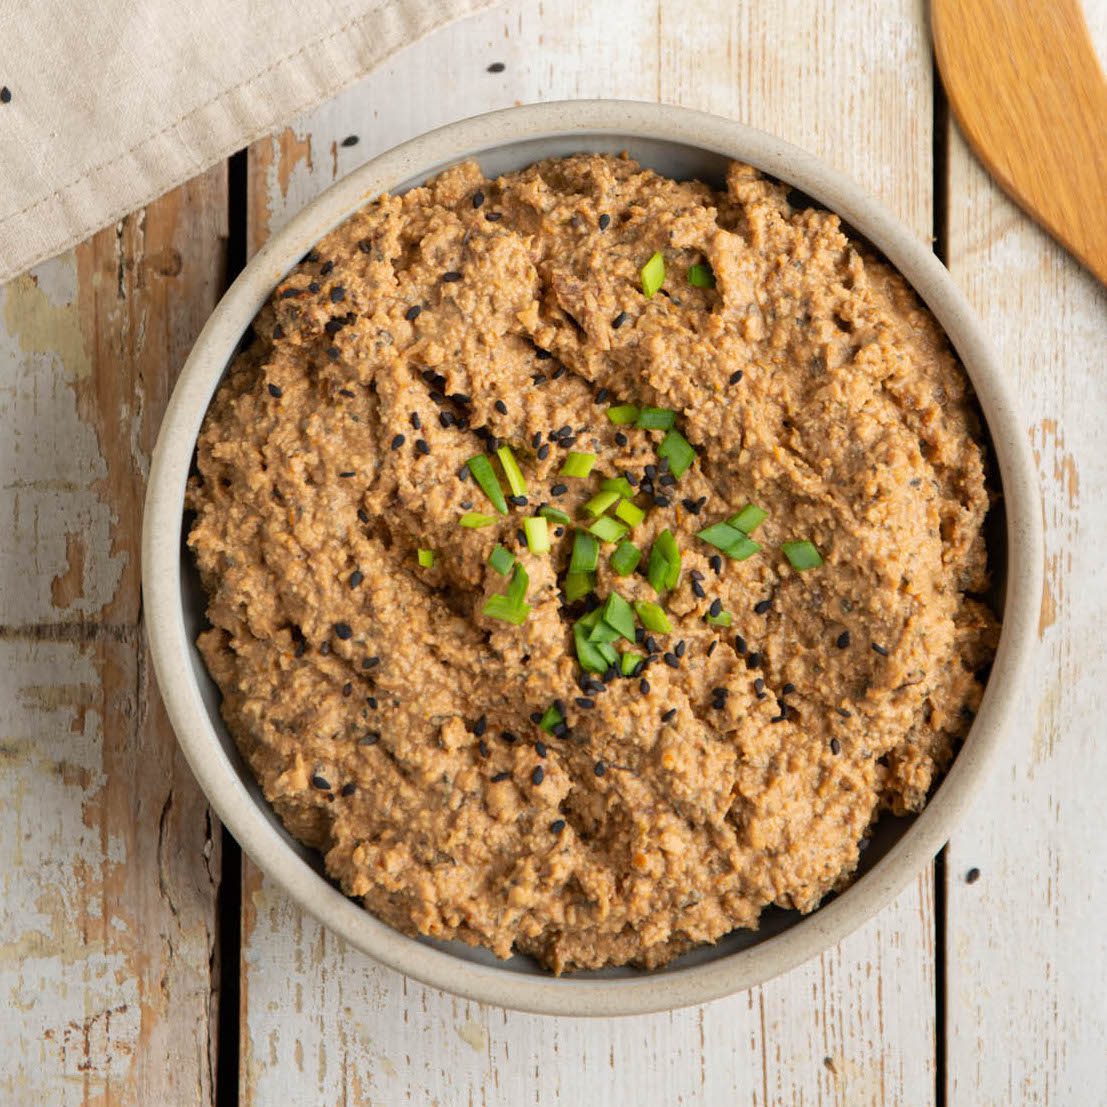 Delicious and easy low glycemic soybean and tofu hummus recipe with tahini. Enjoy the divine Mediterranean flavours of sun-dried tomatoes and dried basil.